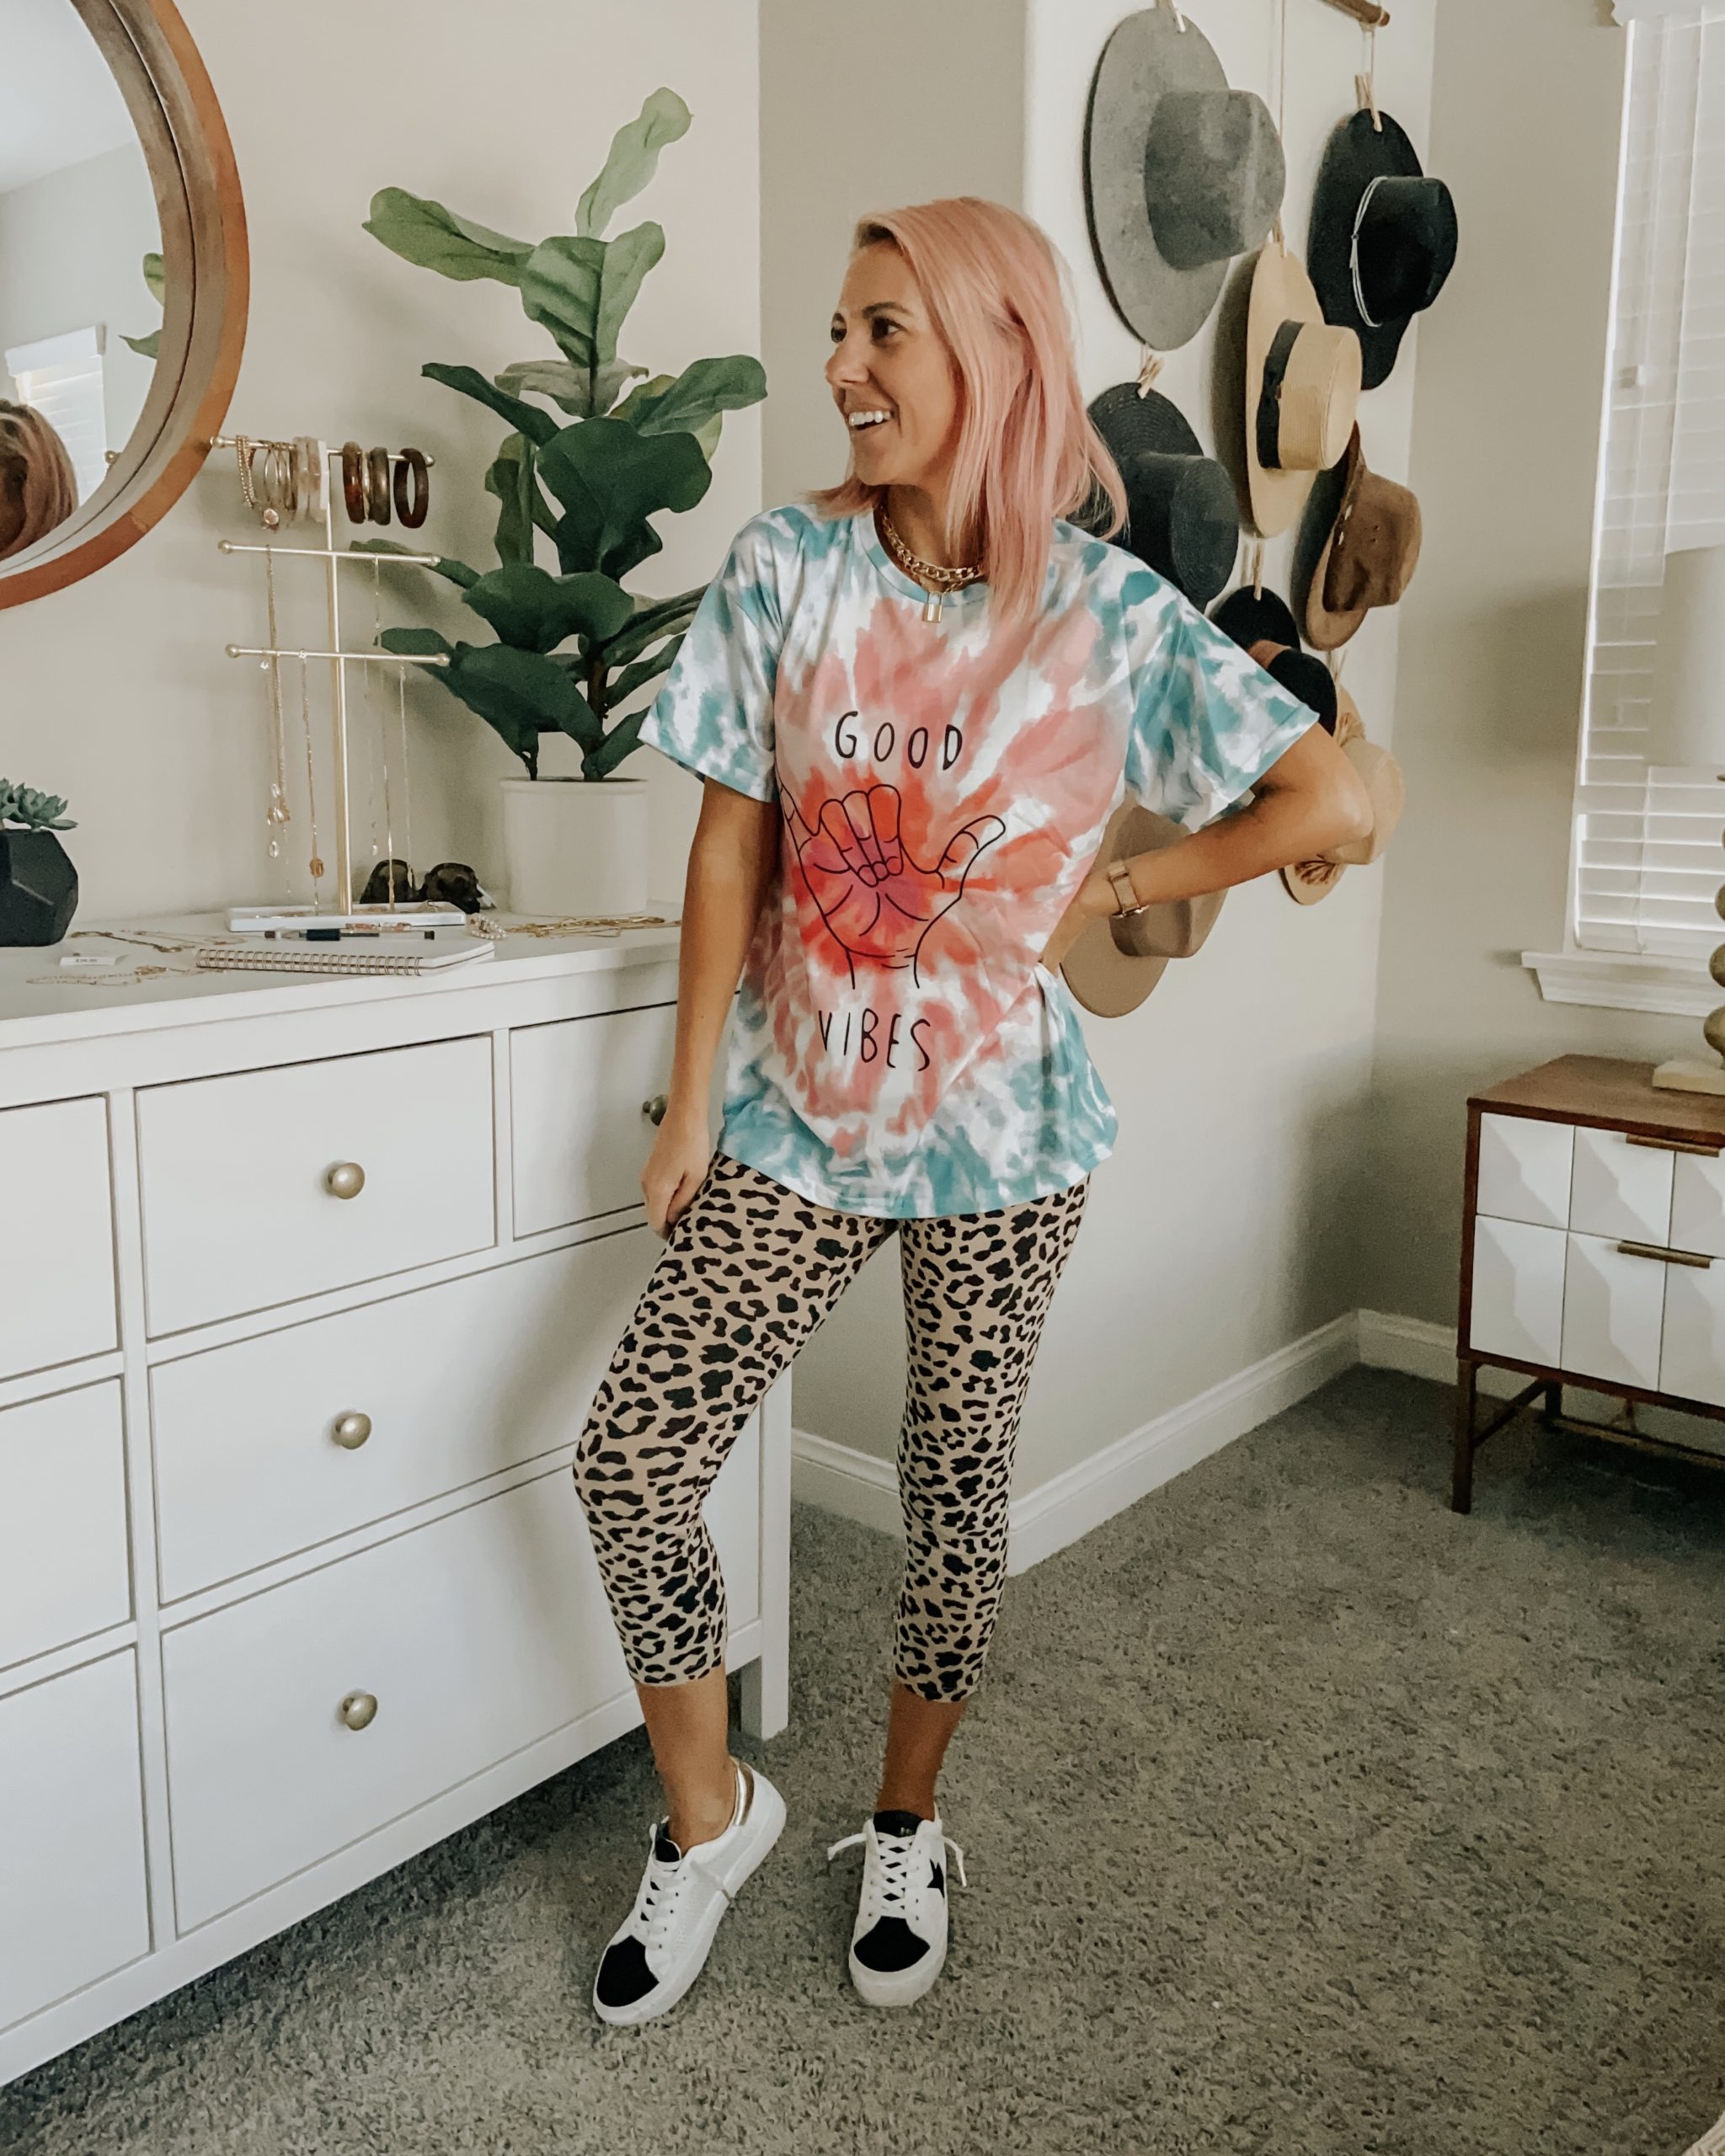 TIE DYE + LEOPARD- Jaclyn De Leon Style + sharing several ways to pattern mix with leopard and tie dye from comfy casual to all dressed up. Style tips included